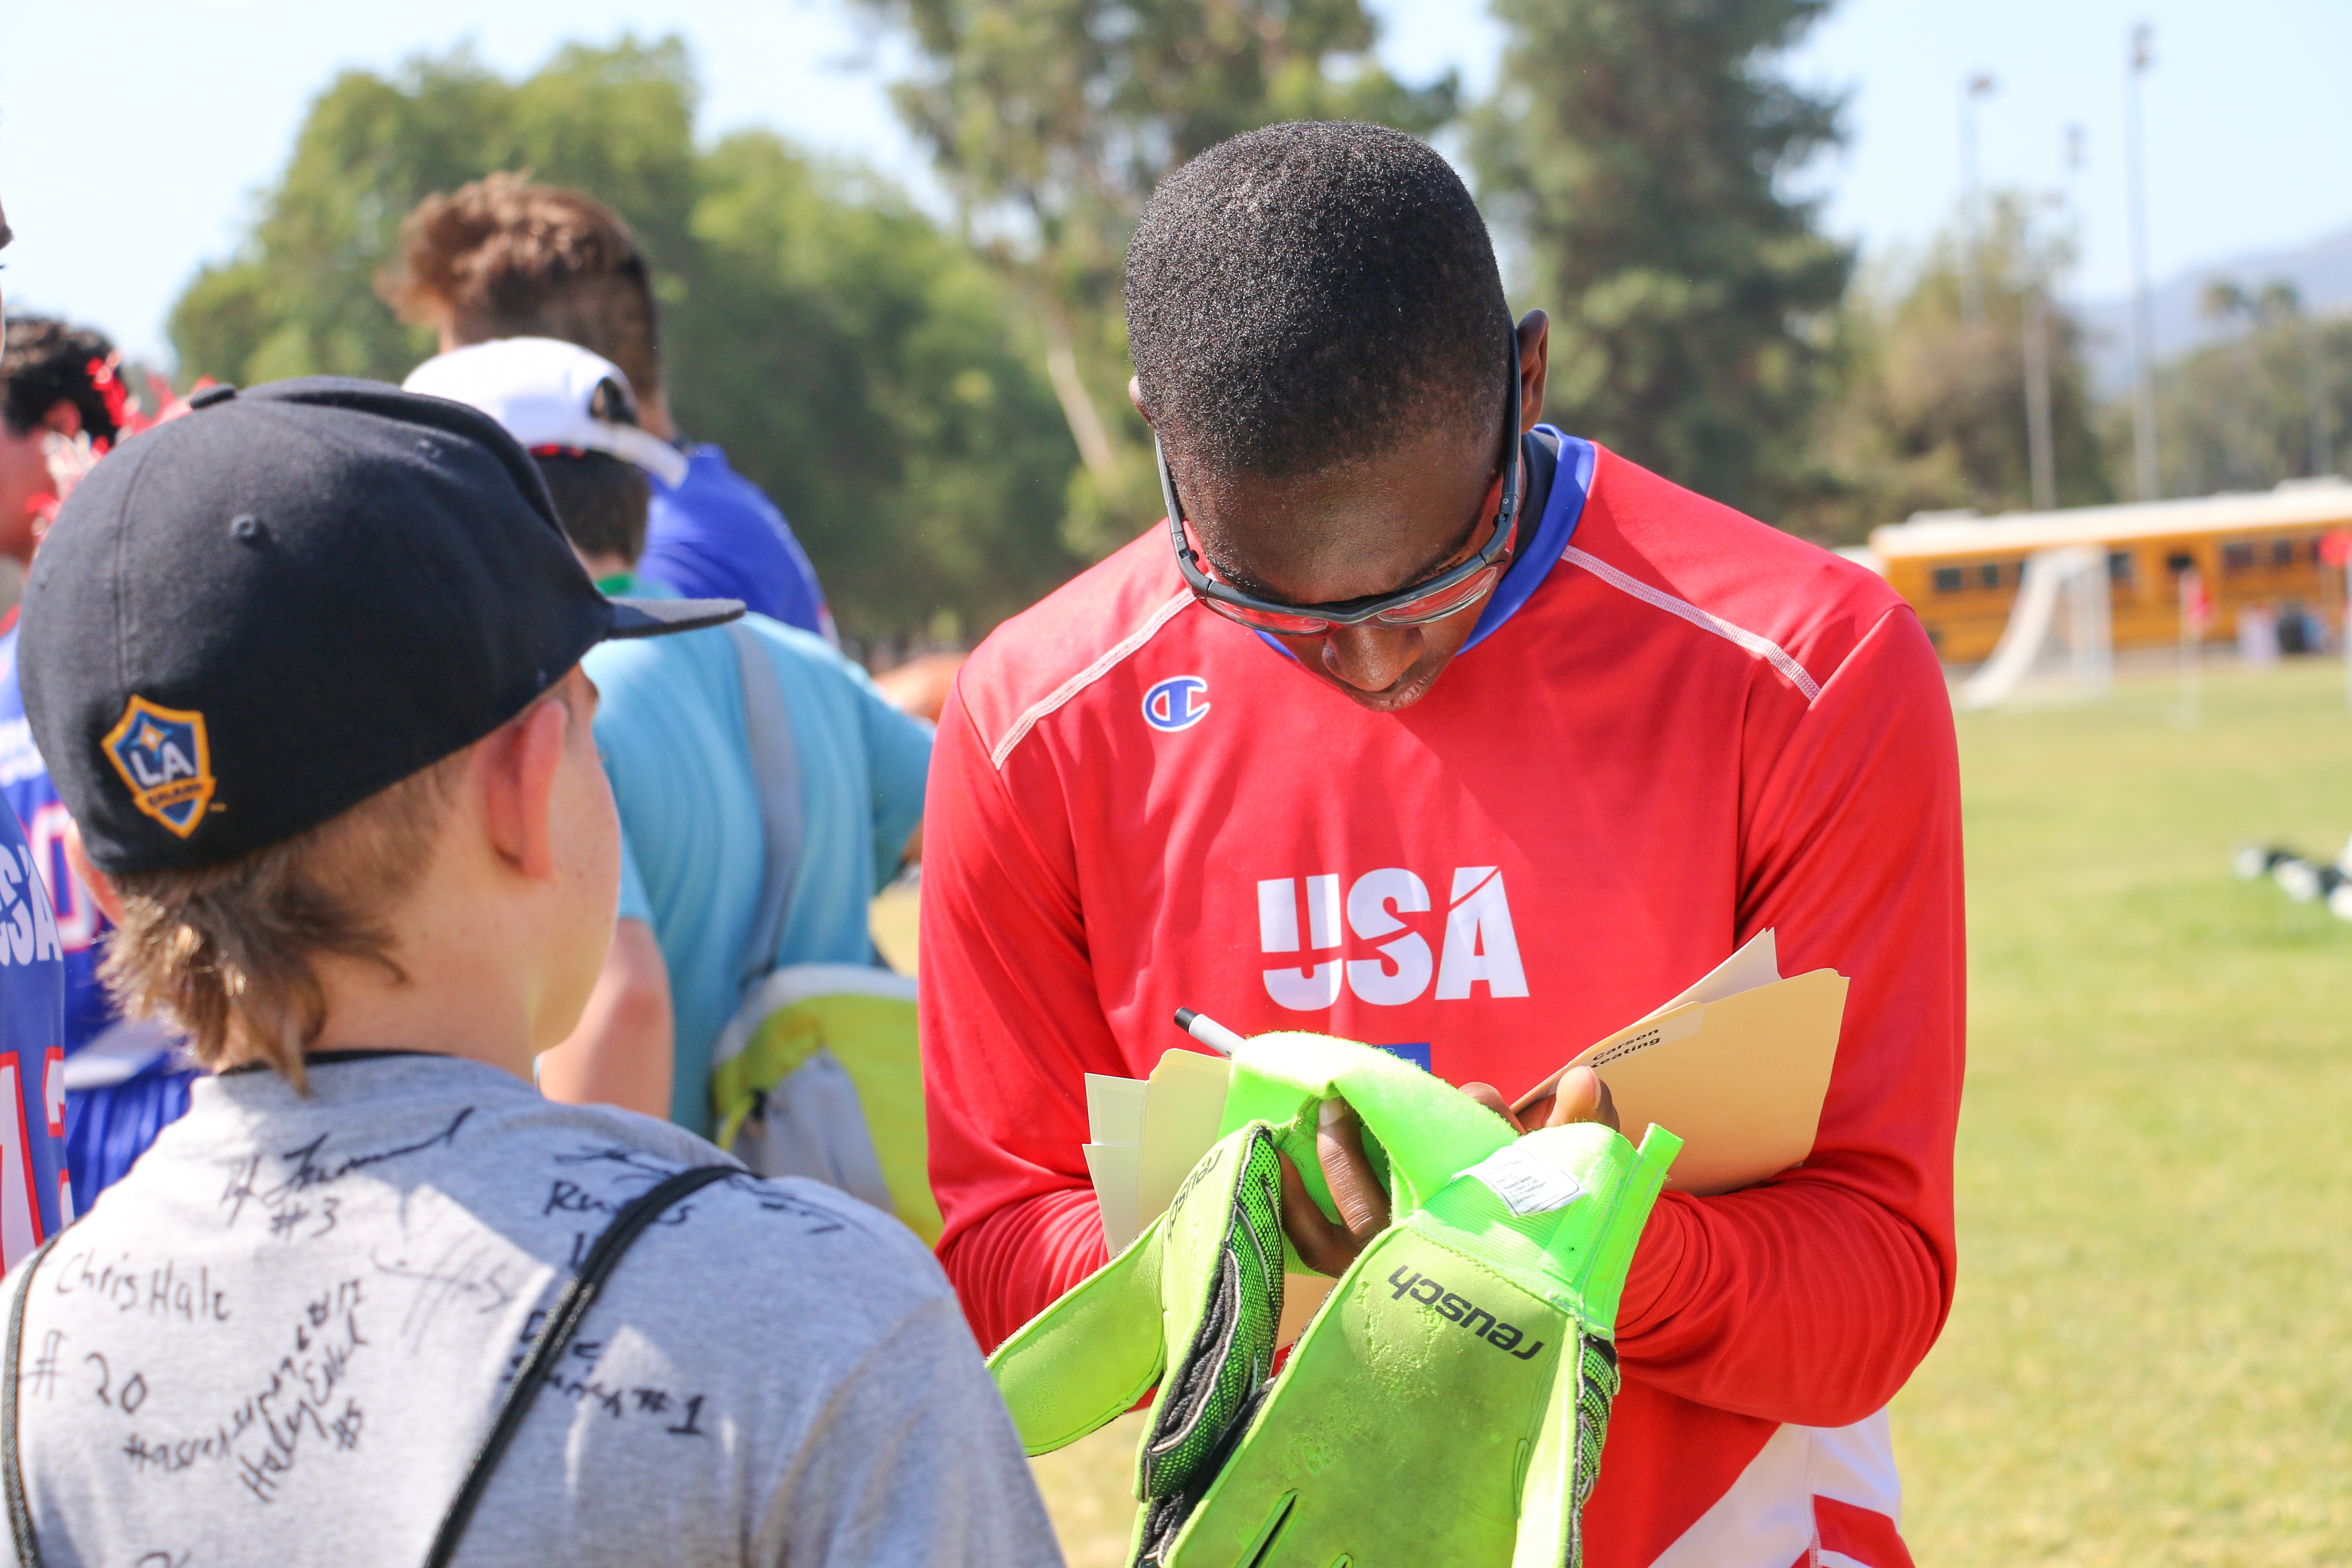 Ordray Smith signs autographs for fans at the World Games (Aaron Mills/Special Olympics USA)